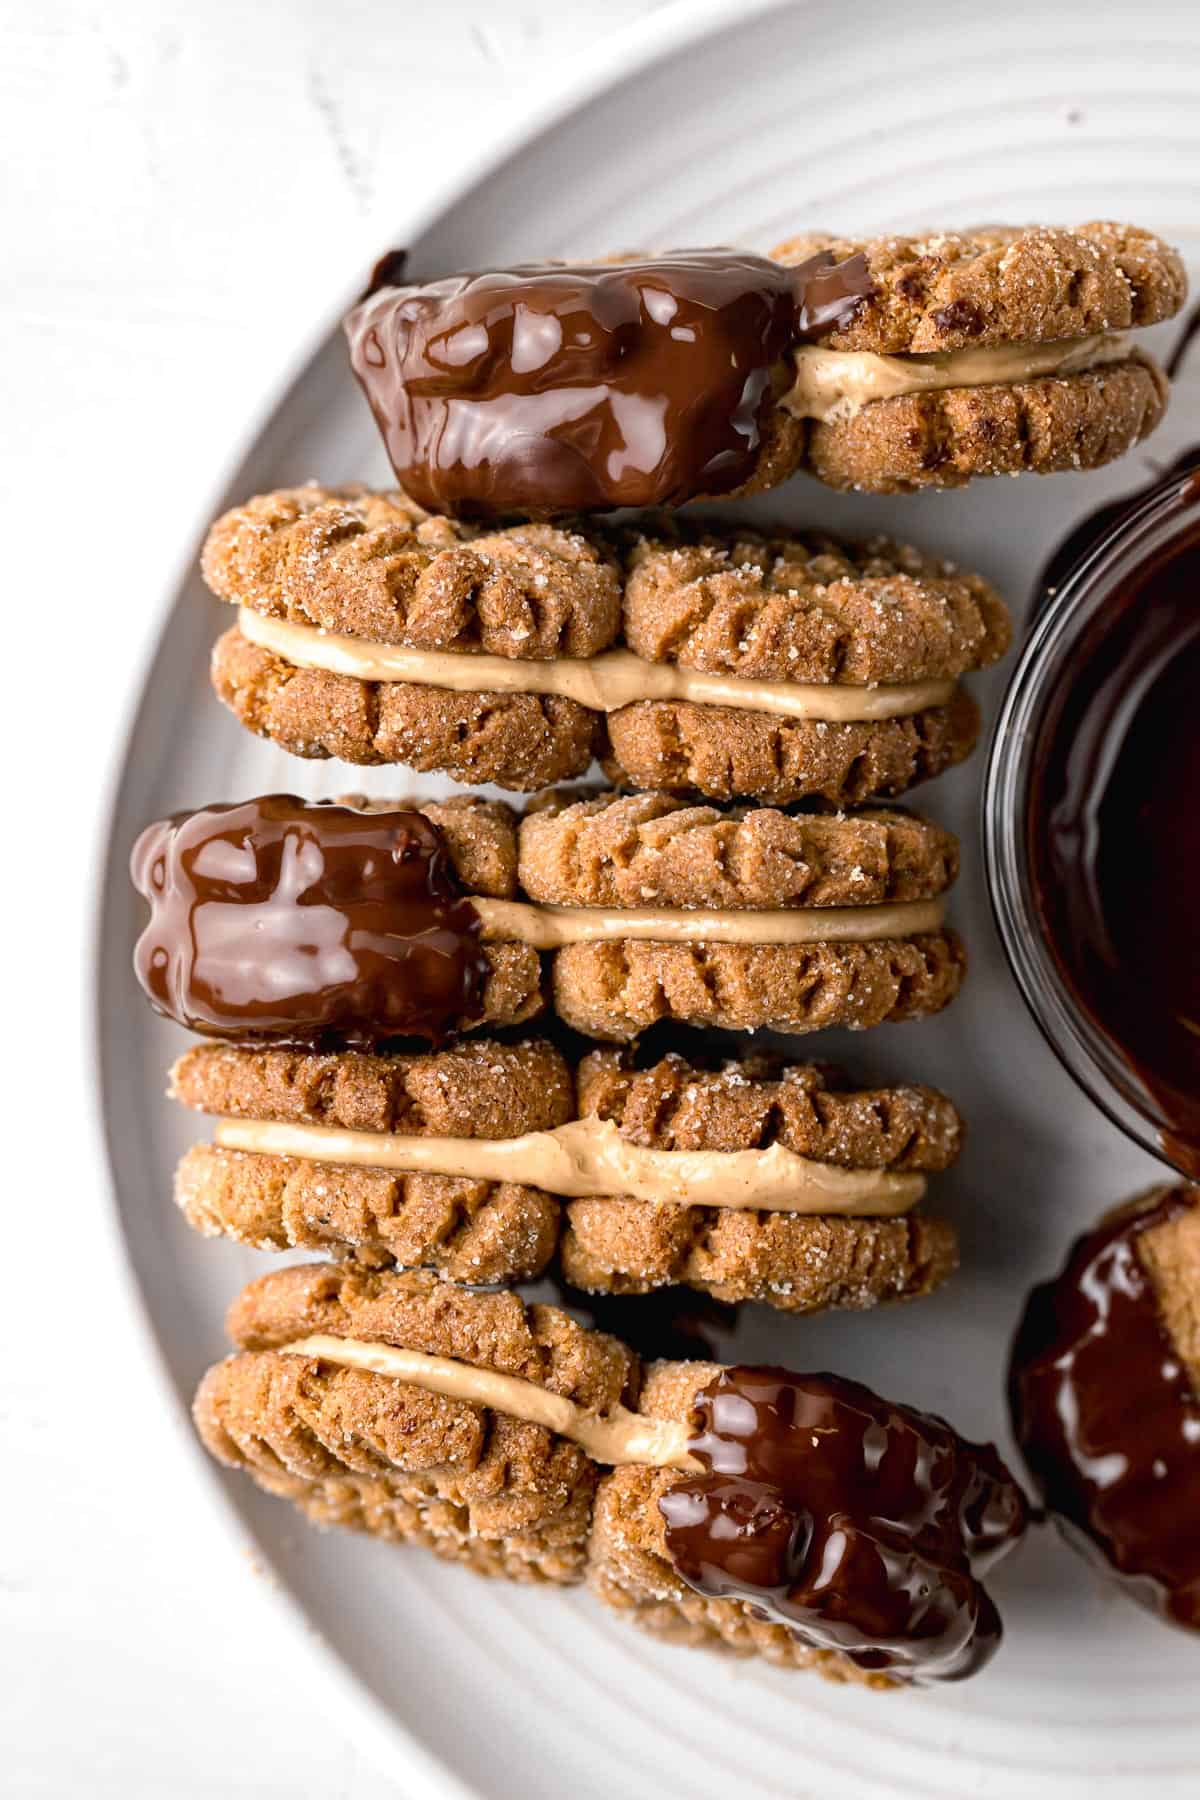 peanut butter sandwich cookies lined up on white plate.